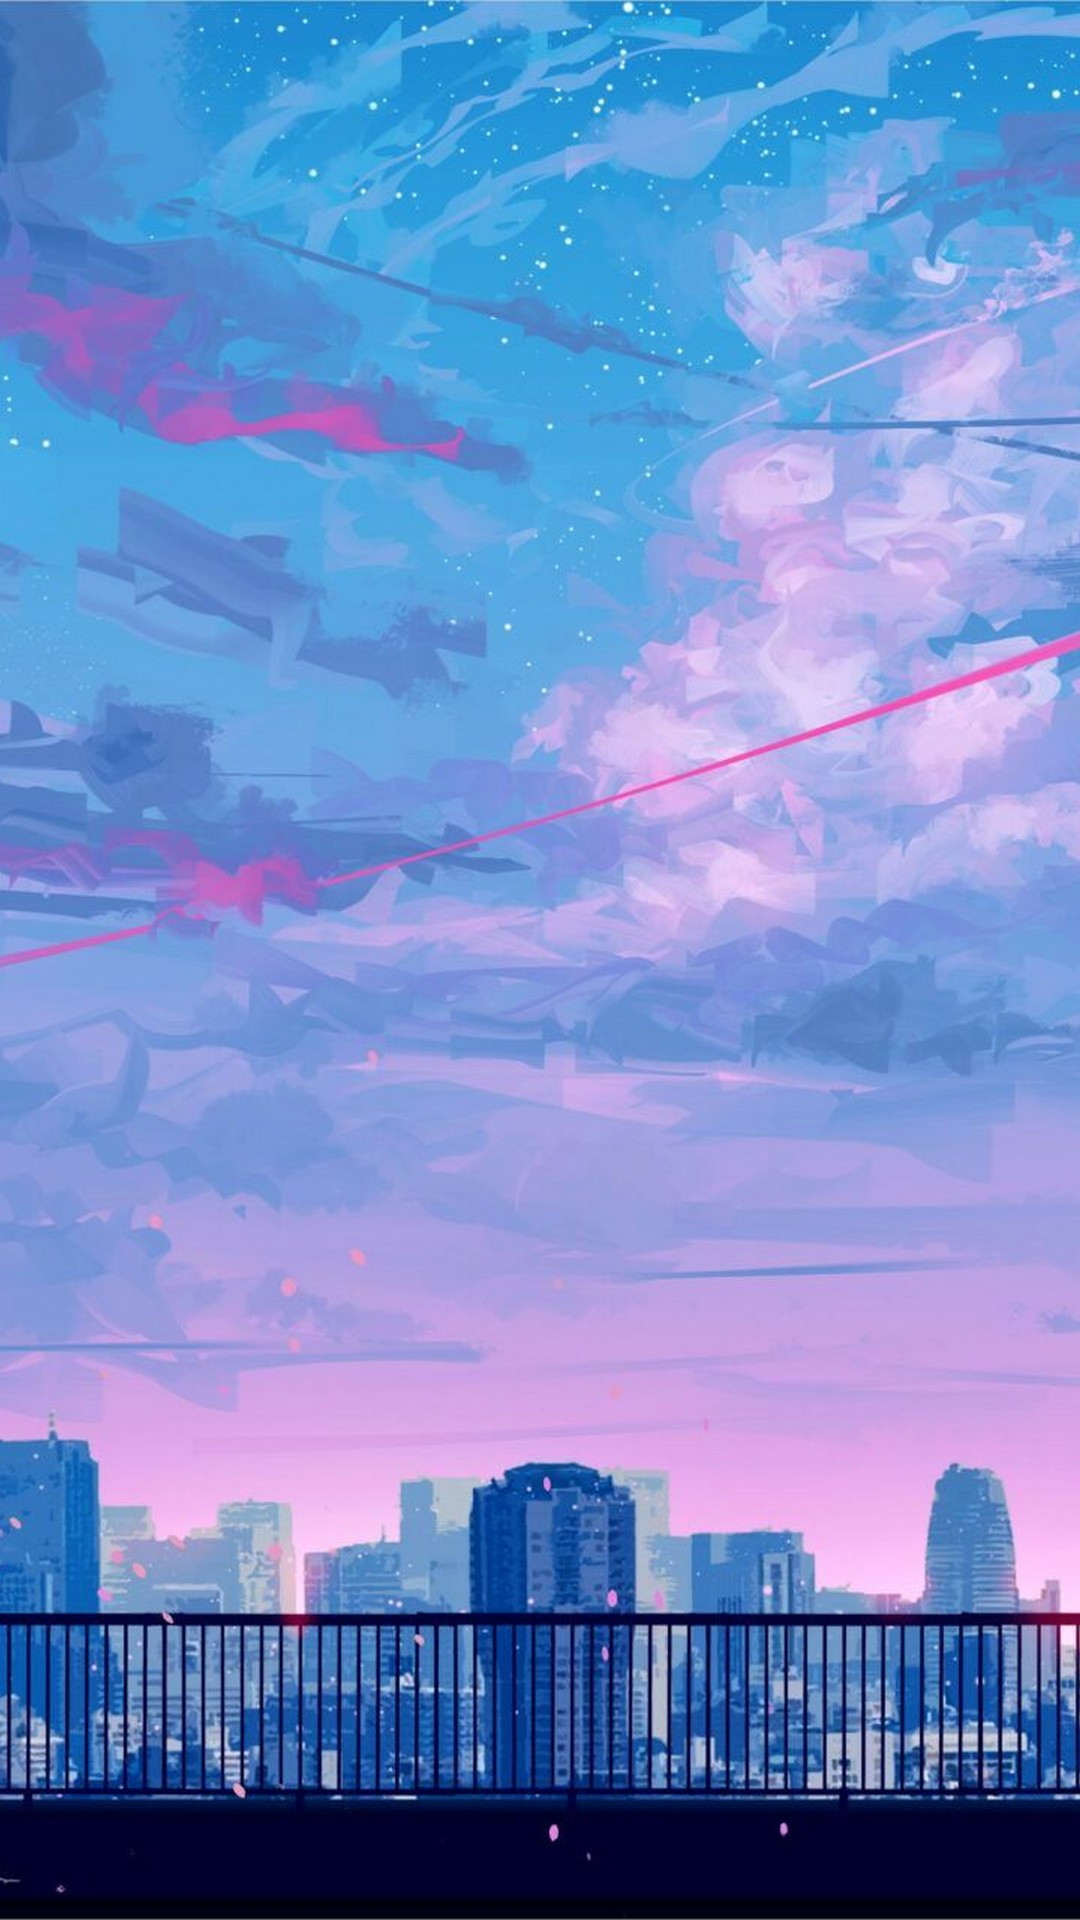 Download Anime City Iphone Aesthetic Wallpaper | Wallpapers.com